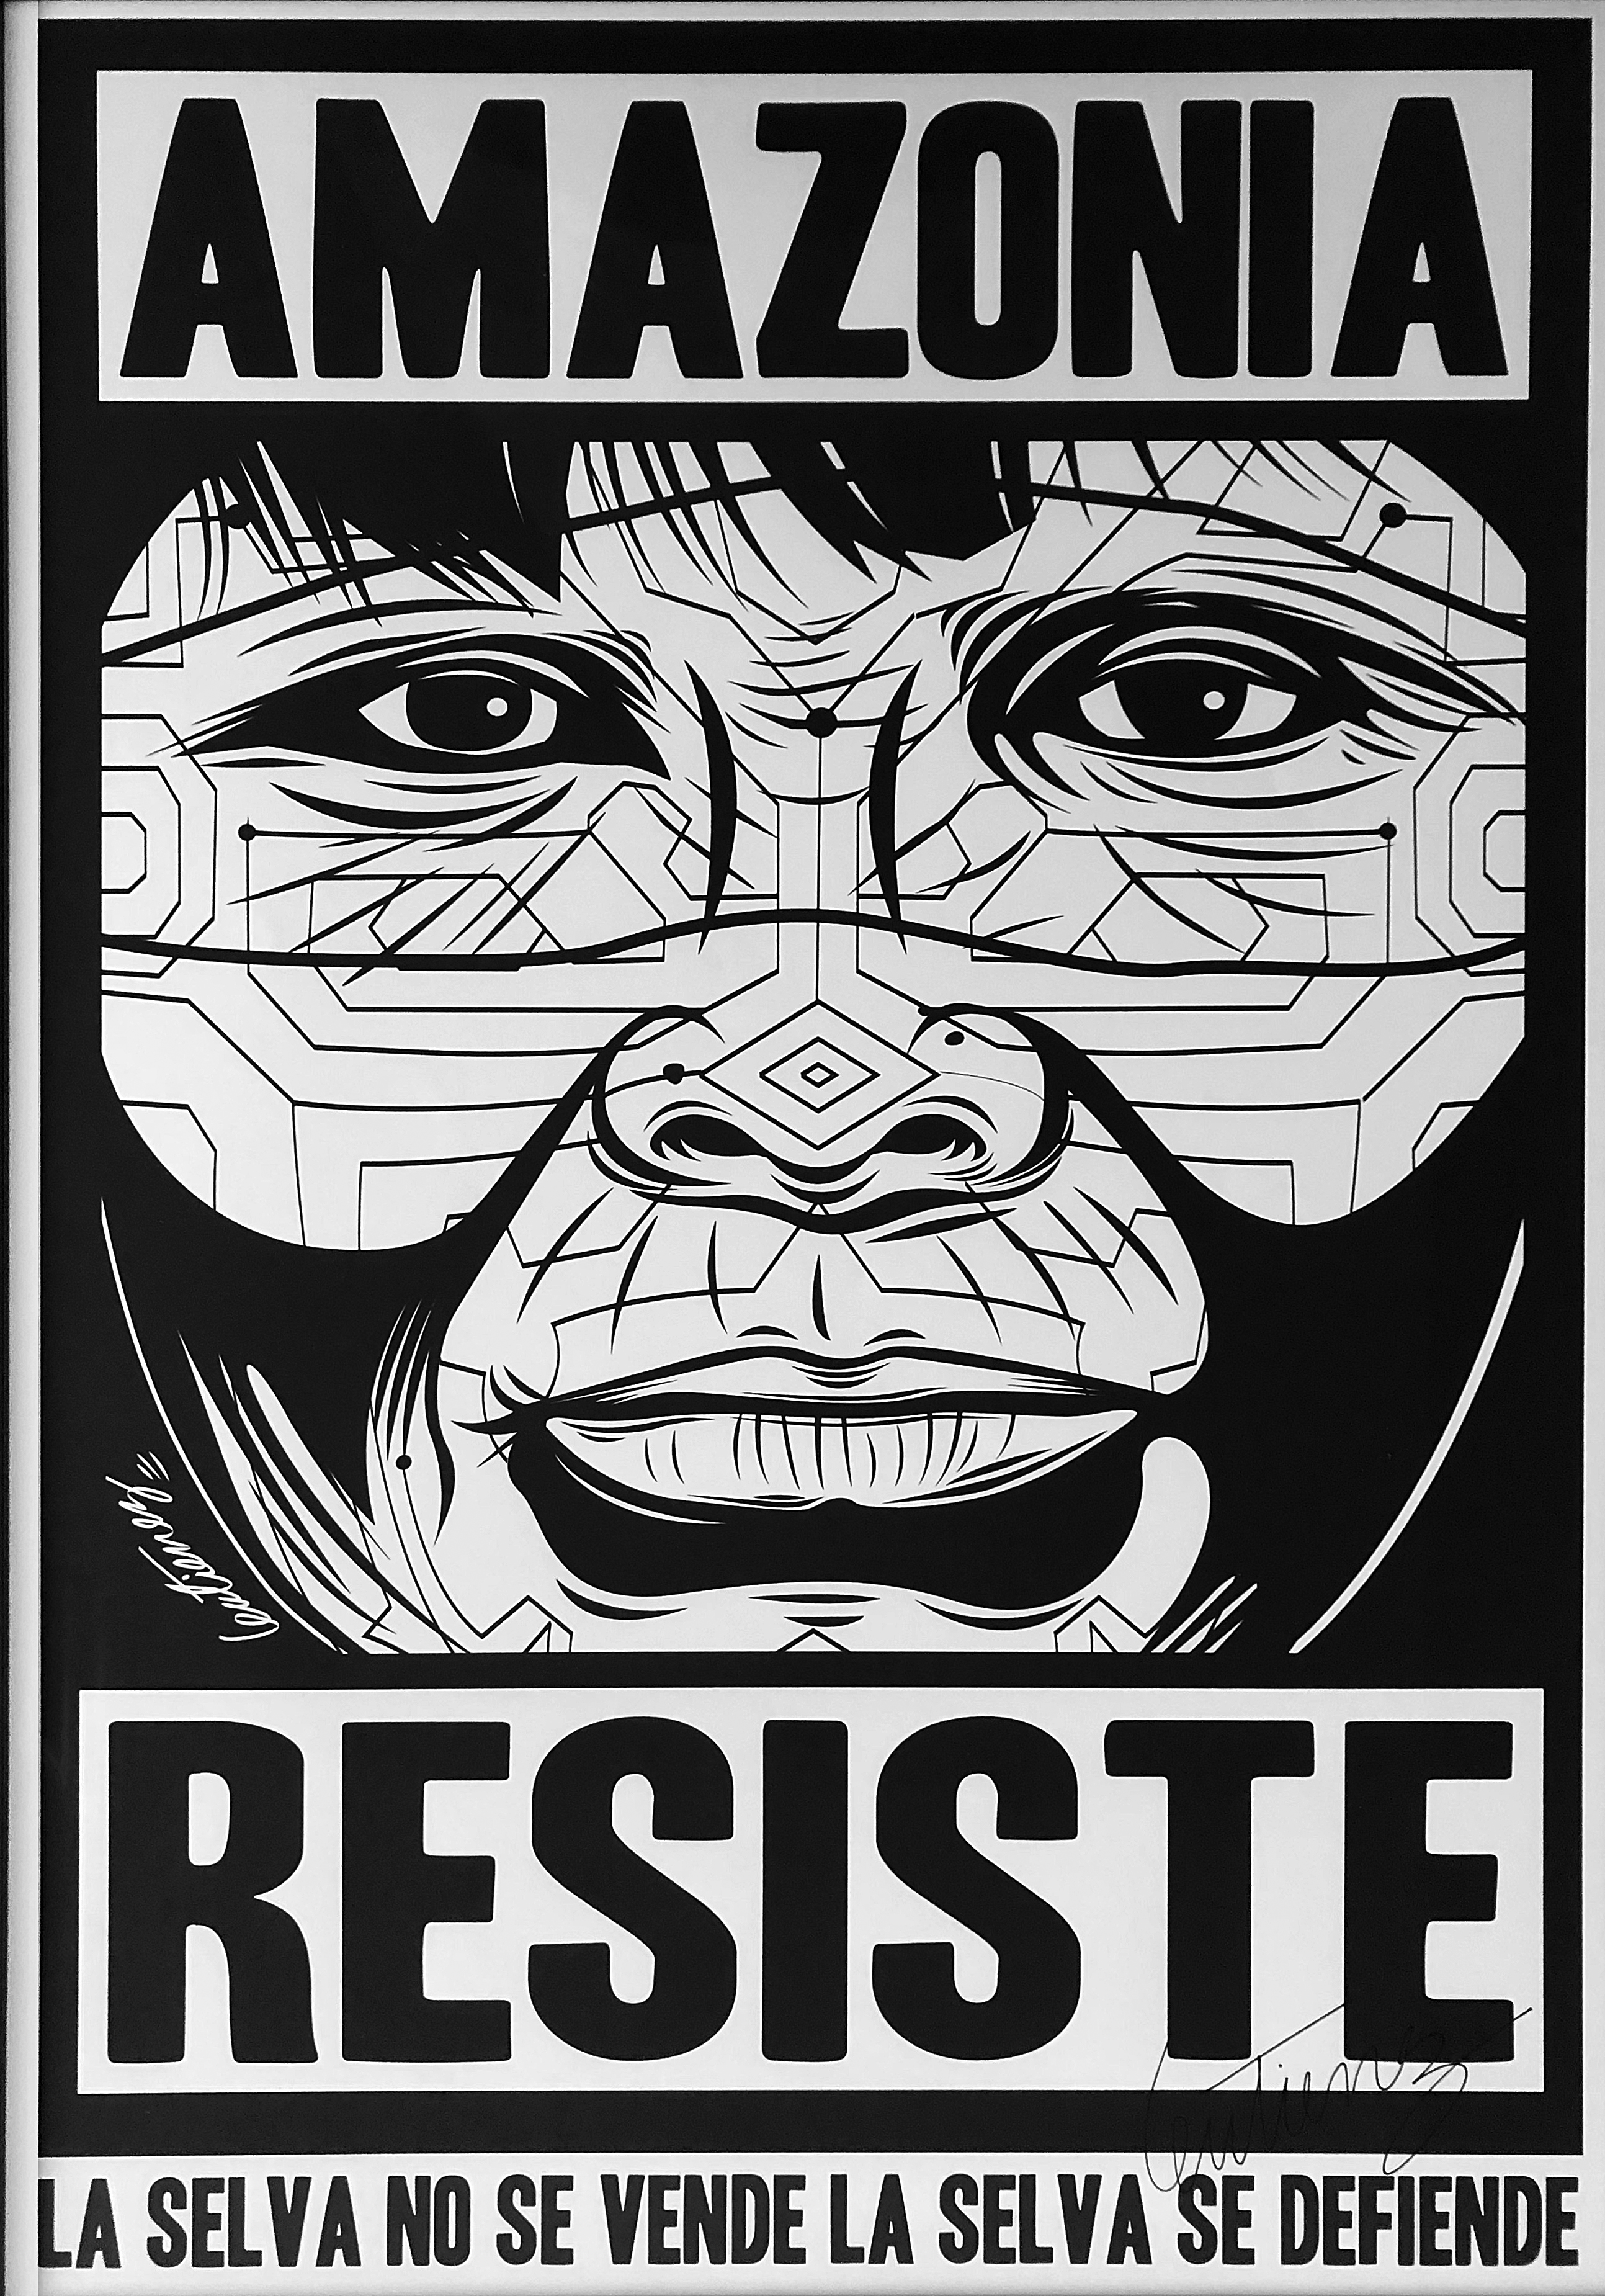 screenprinted poster with black and white illustration of person's face between block text spelling out "AMAZONIA RESISTE"